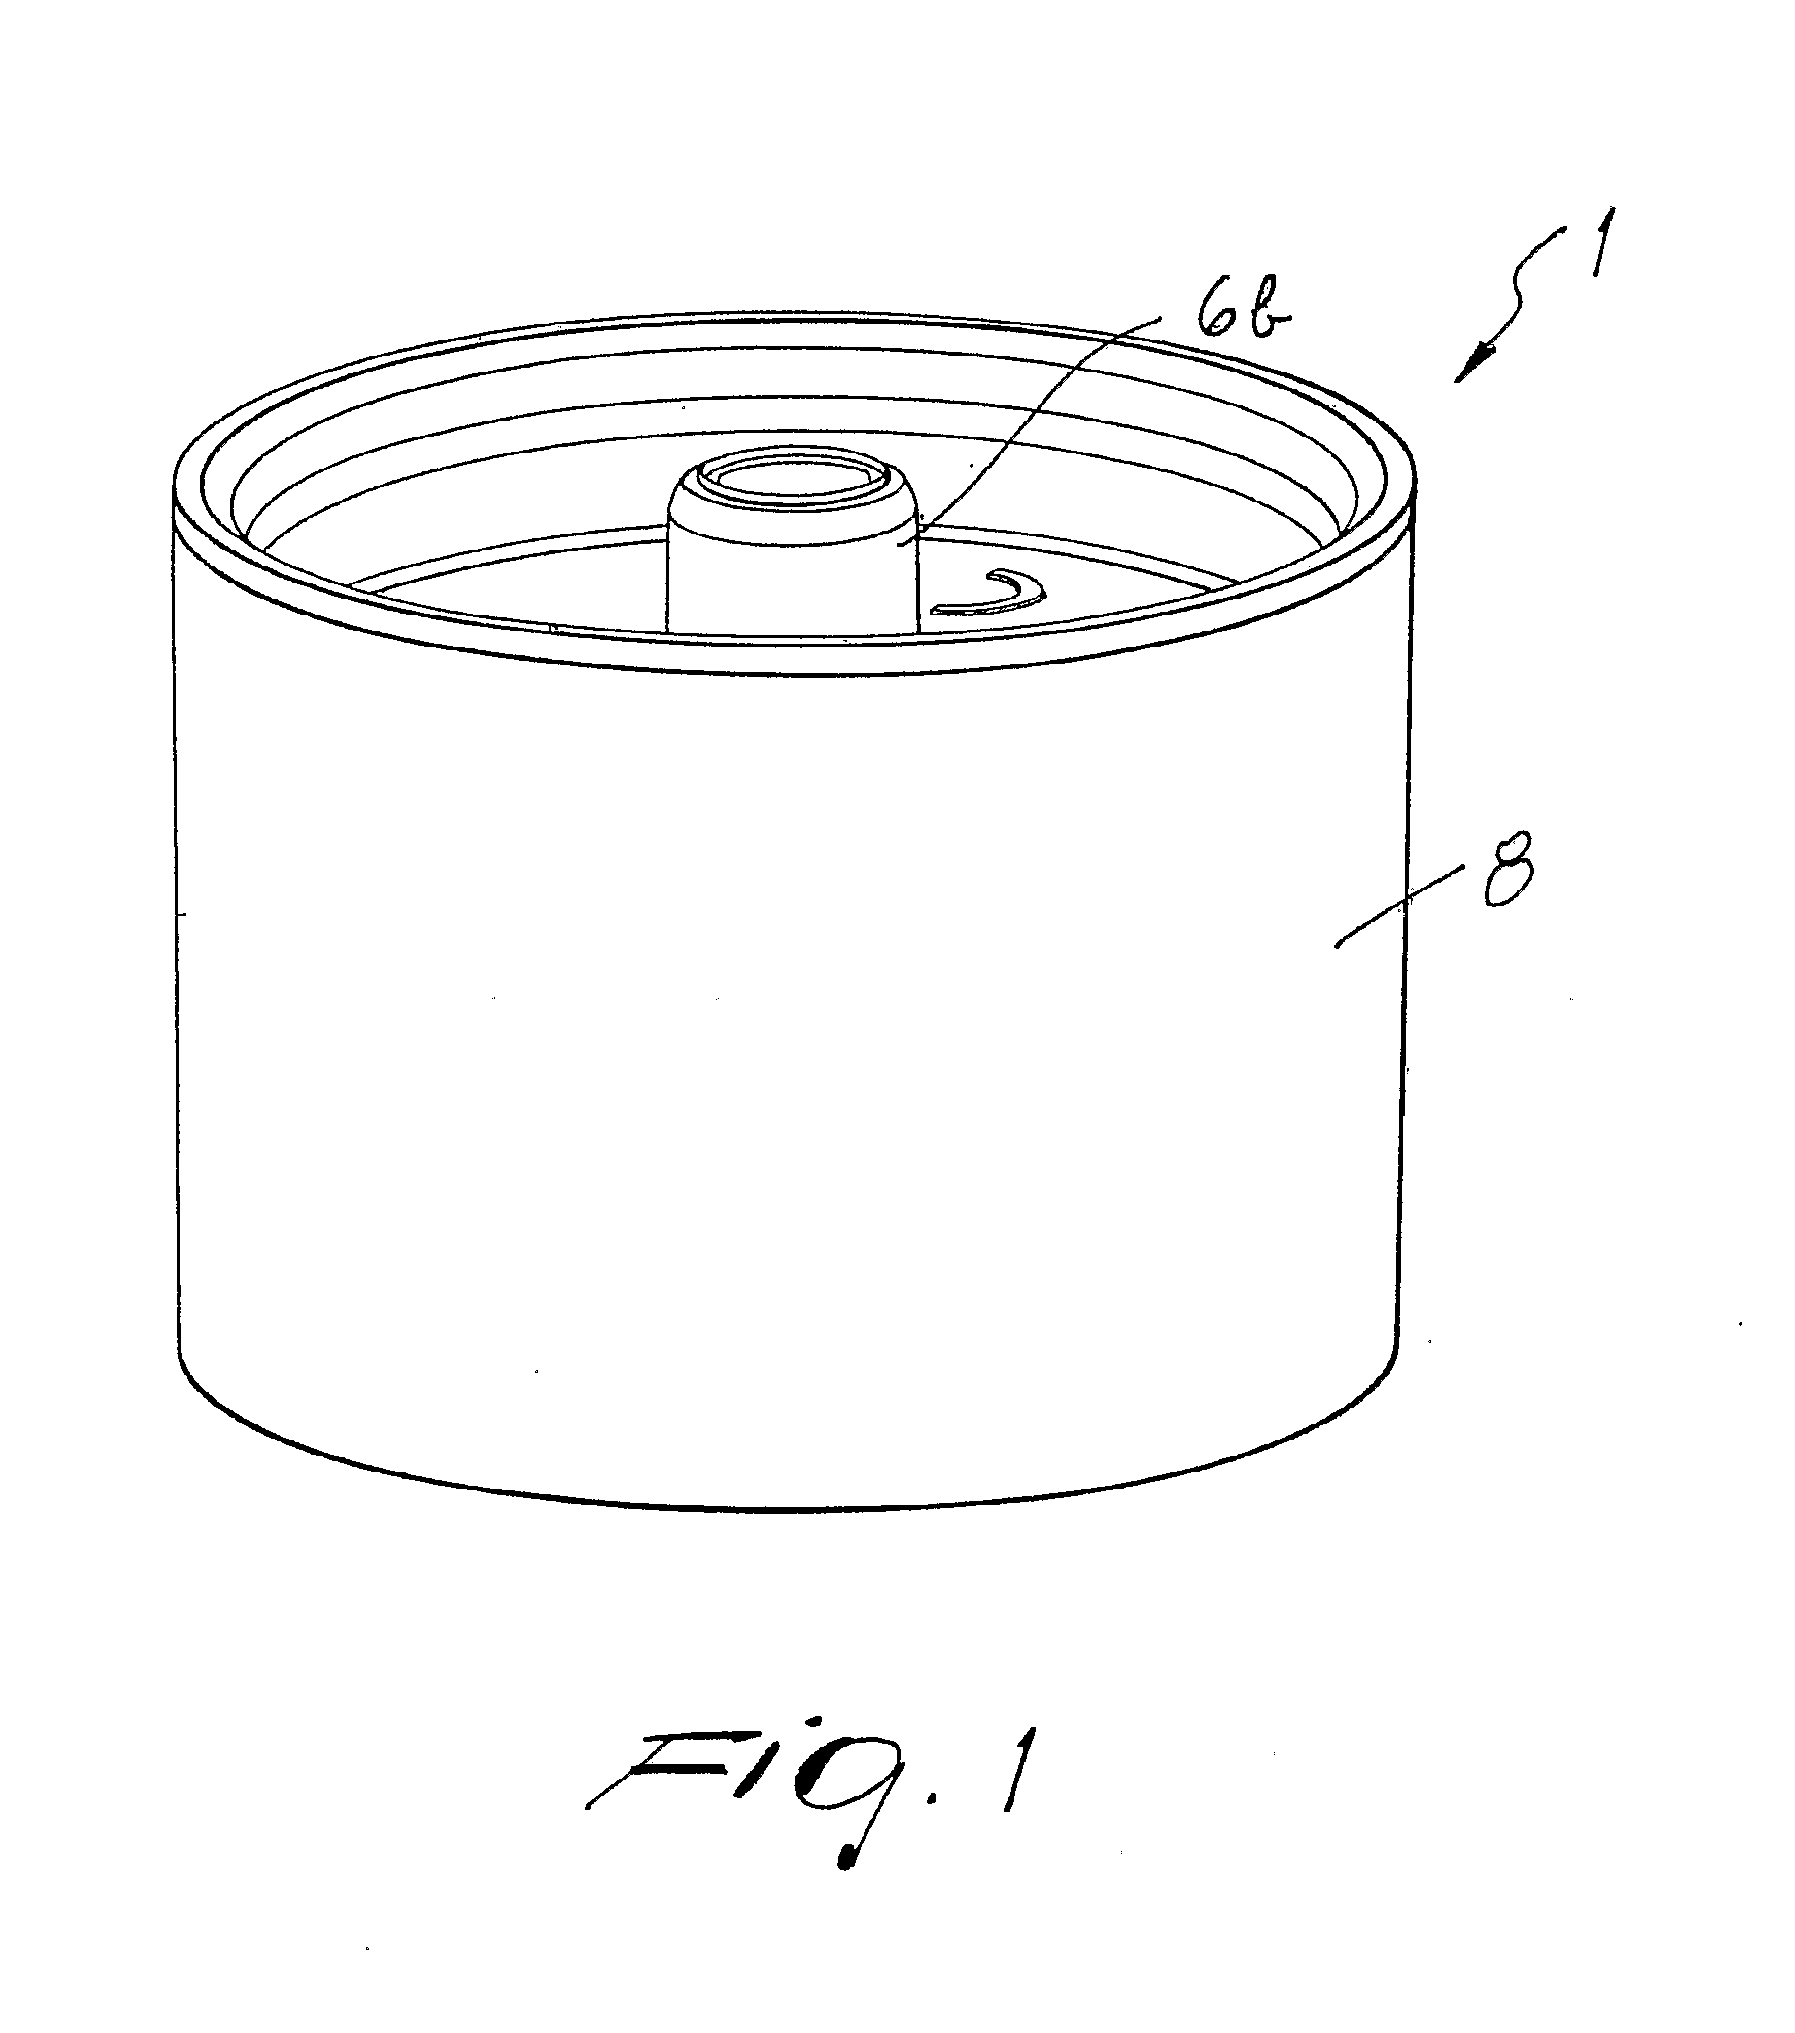 Integrated cartridge for extracting a beverage from a particulate substance